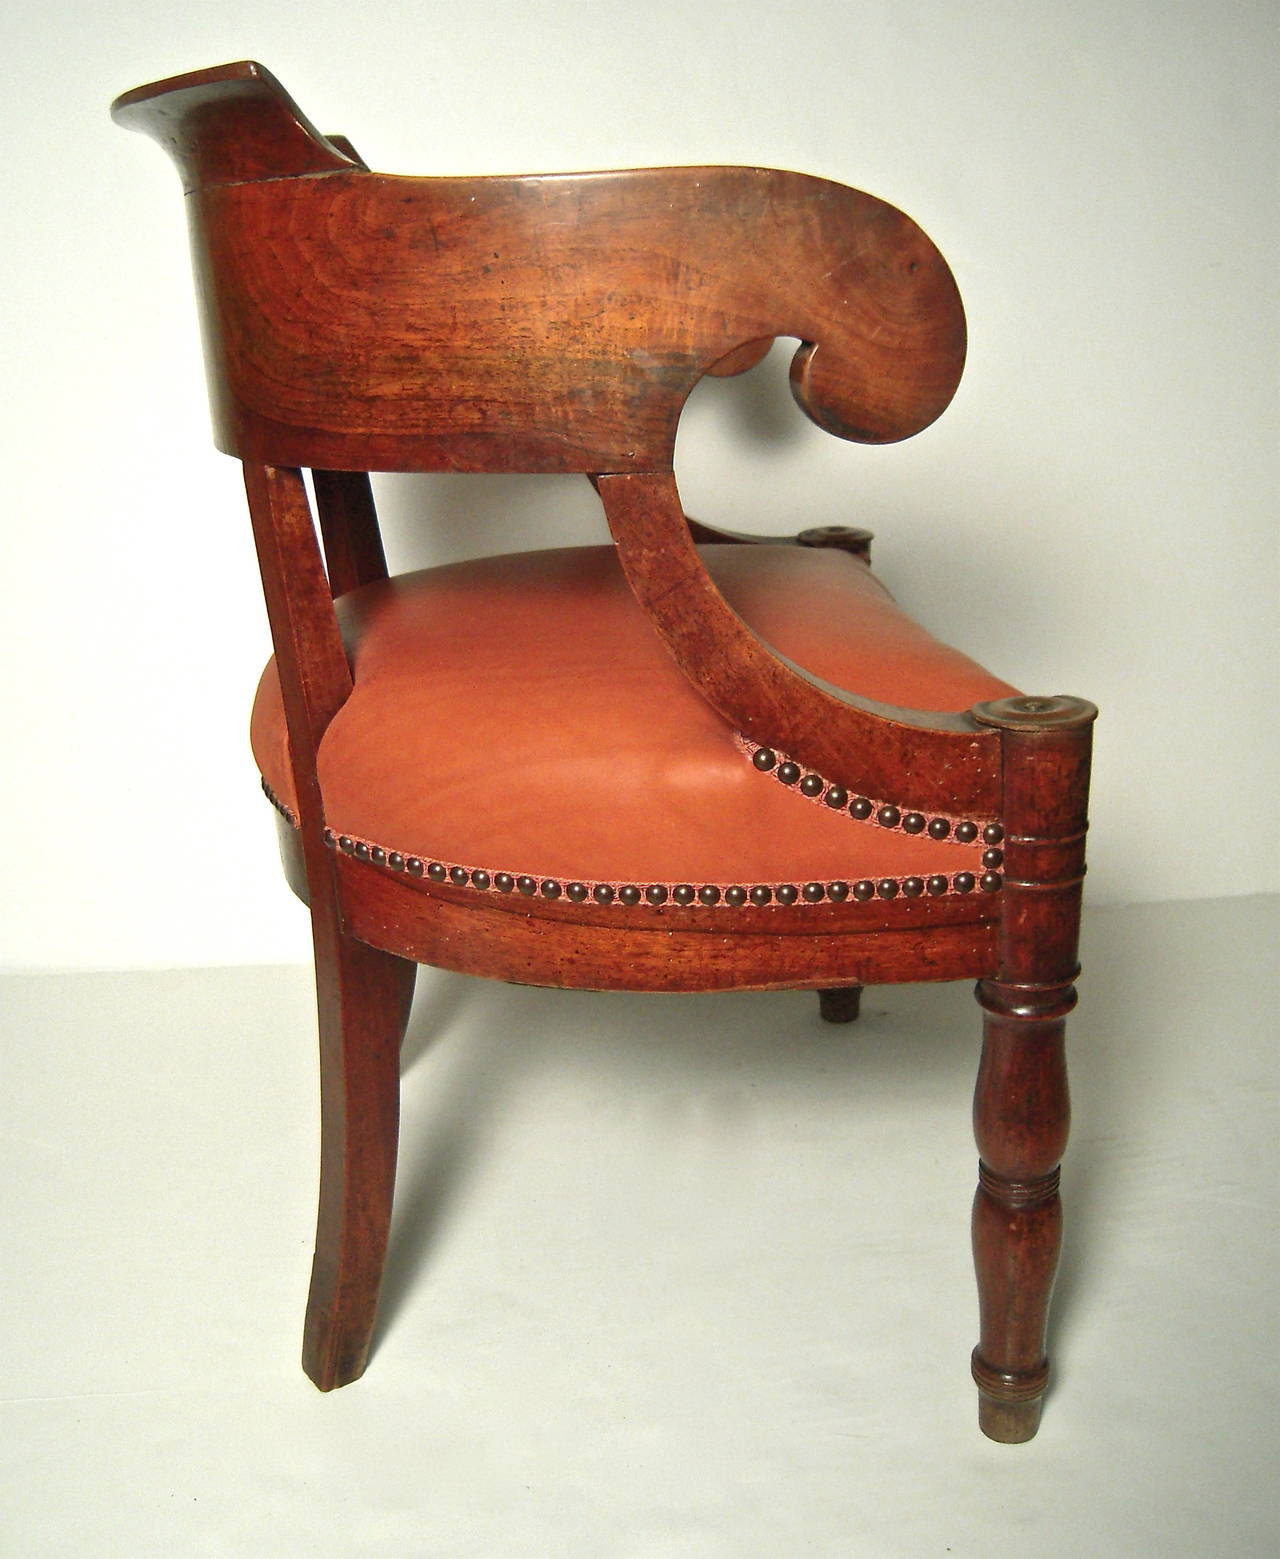 Carved French Empire Arm Chair or Desk Chair